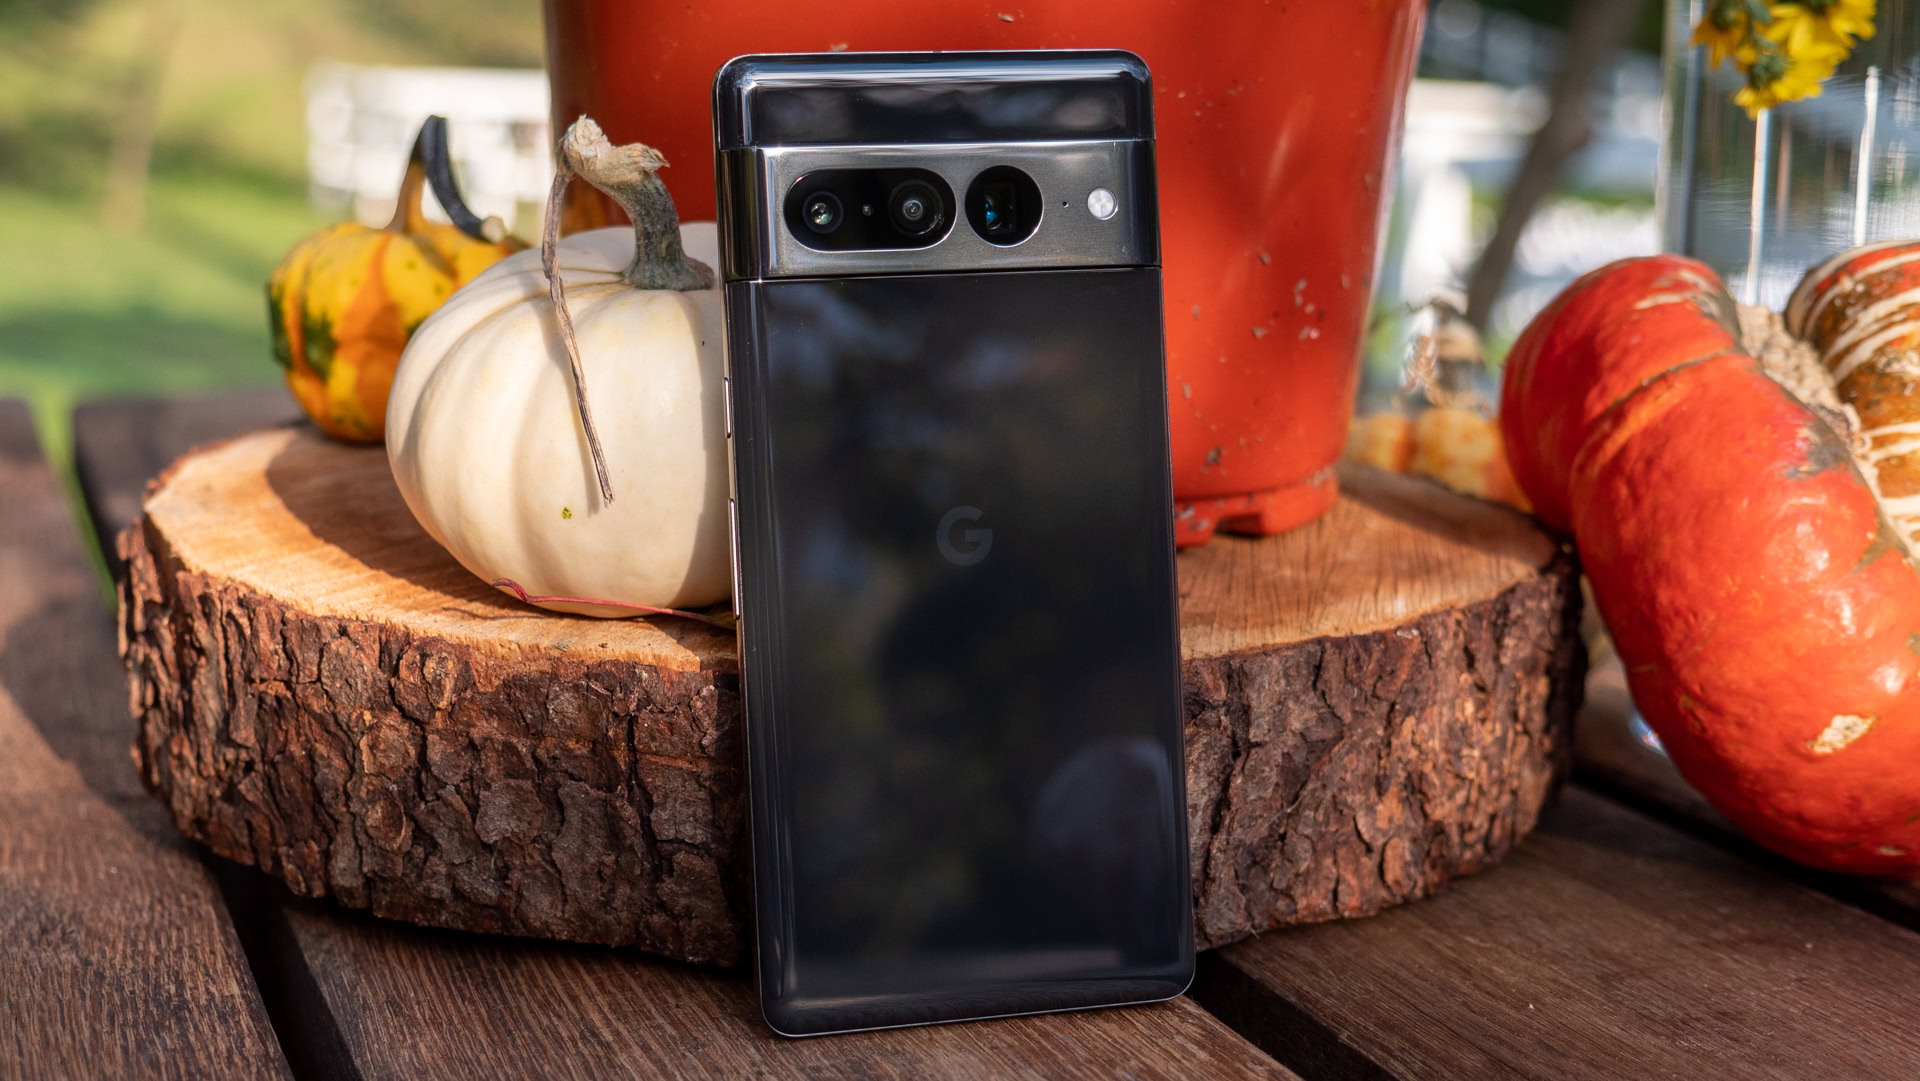 Google Pixel 7 Pro review: All that and a bag of (Tensor) chips